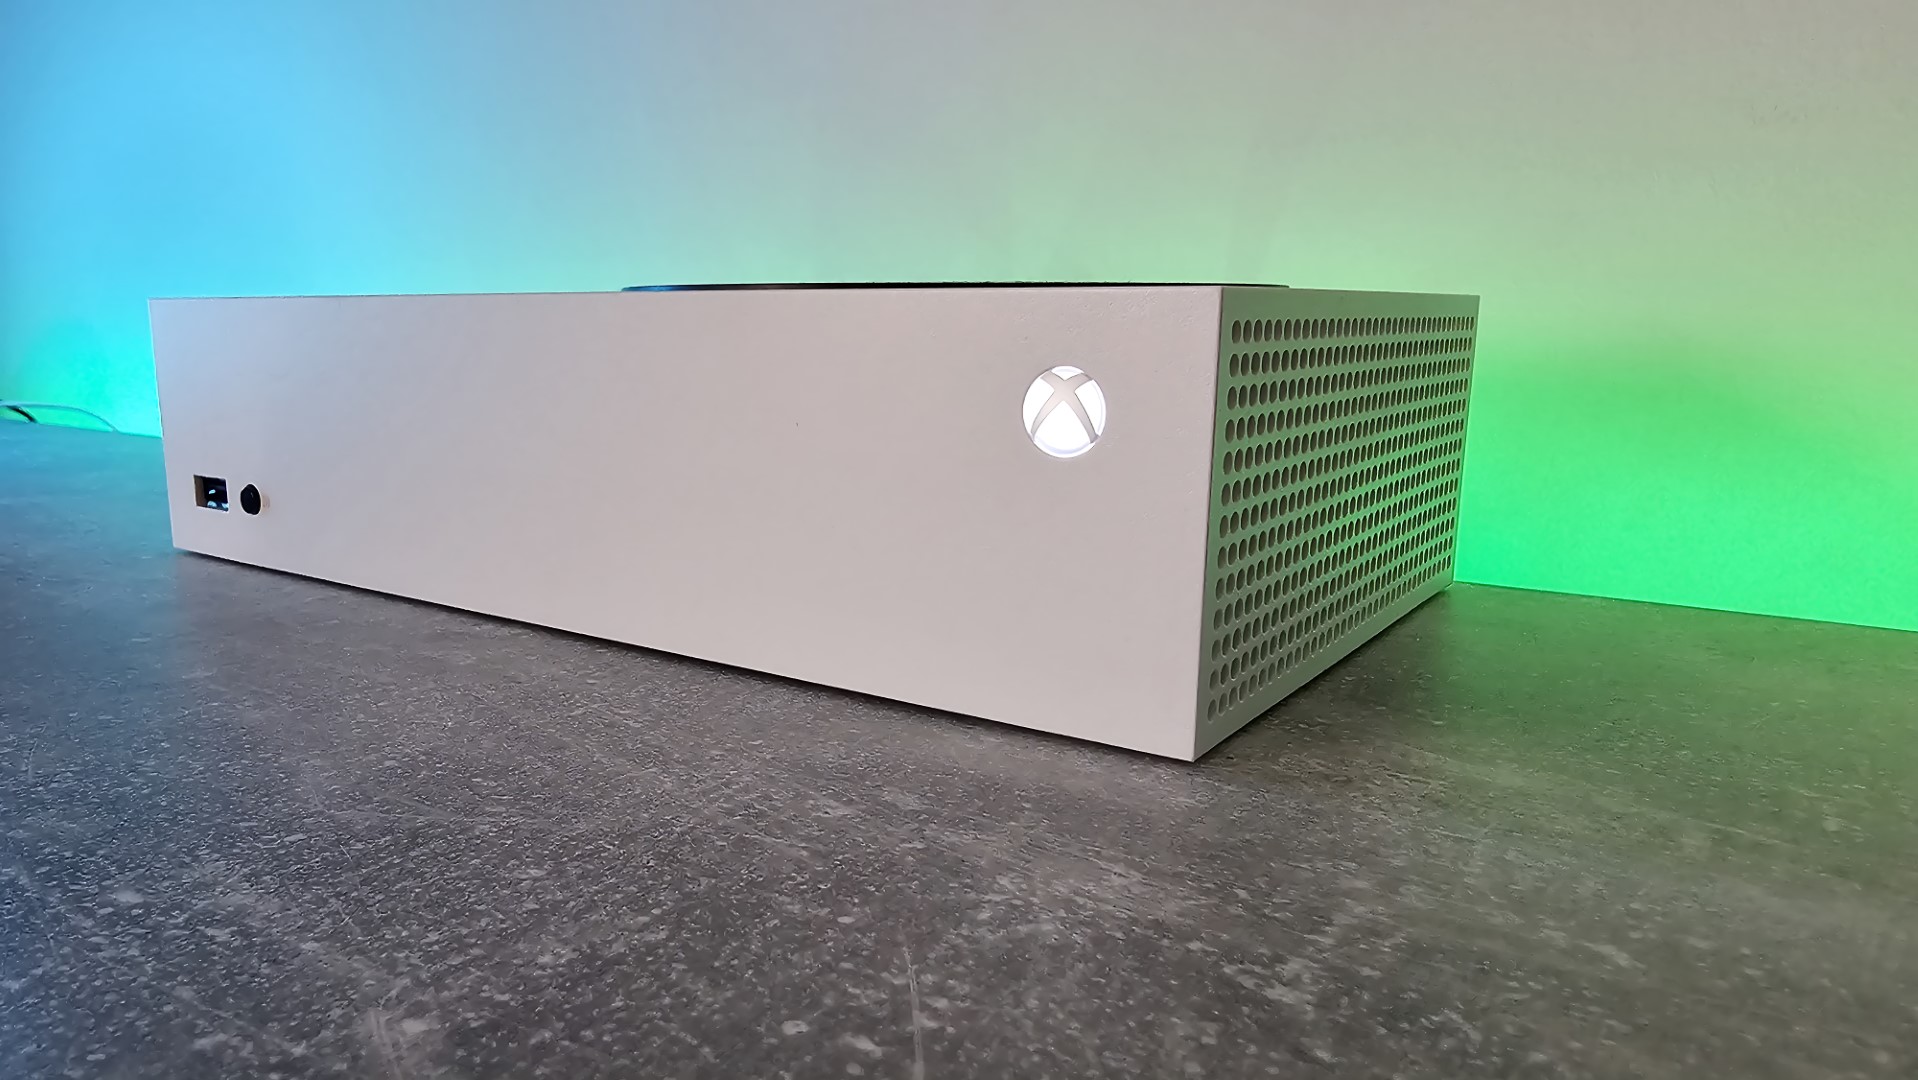 Xbox Series S impressions: good things come in 364GB packages